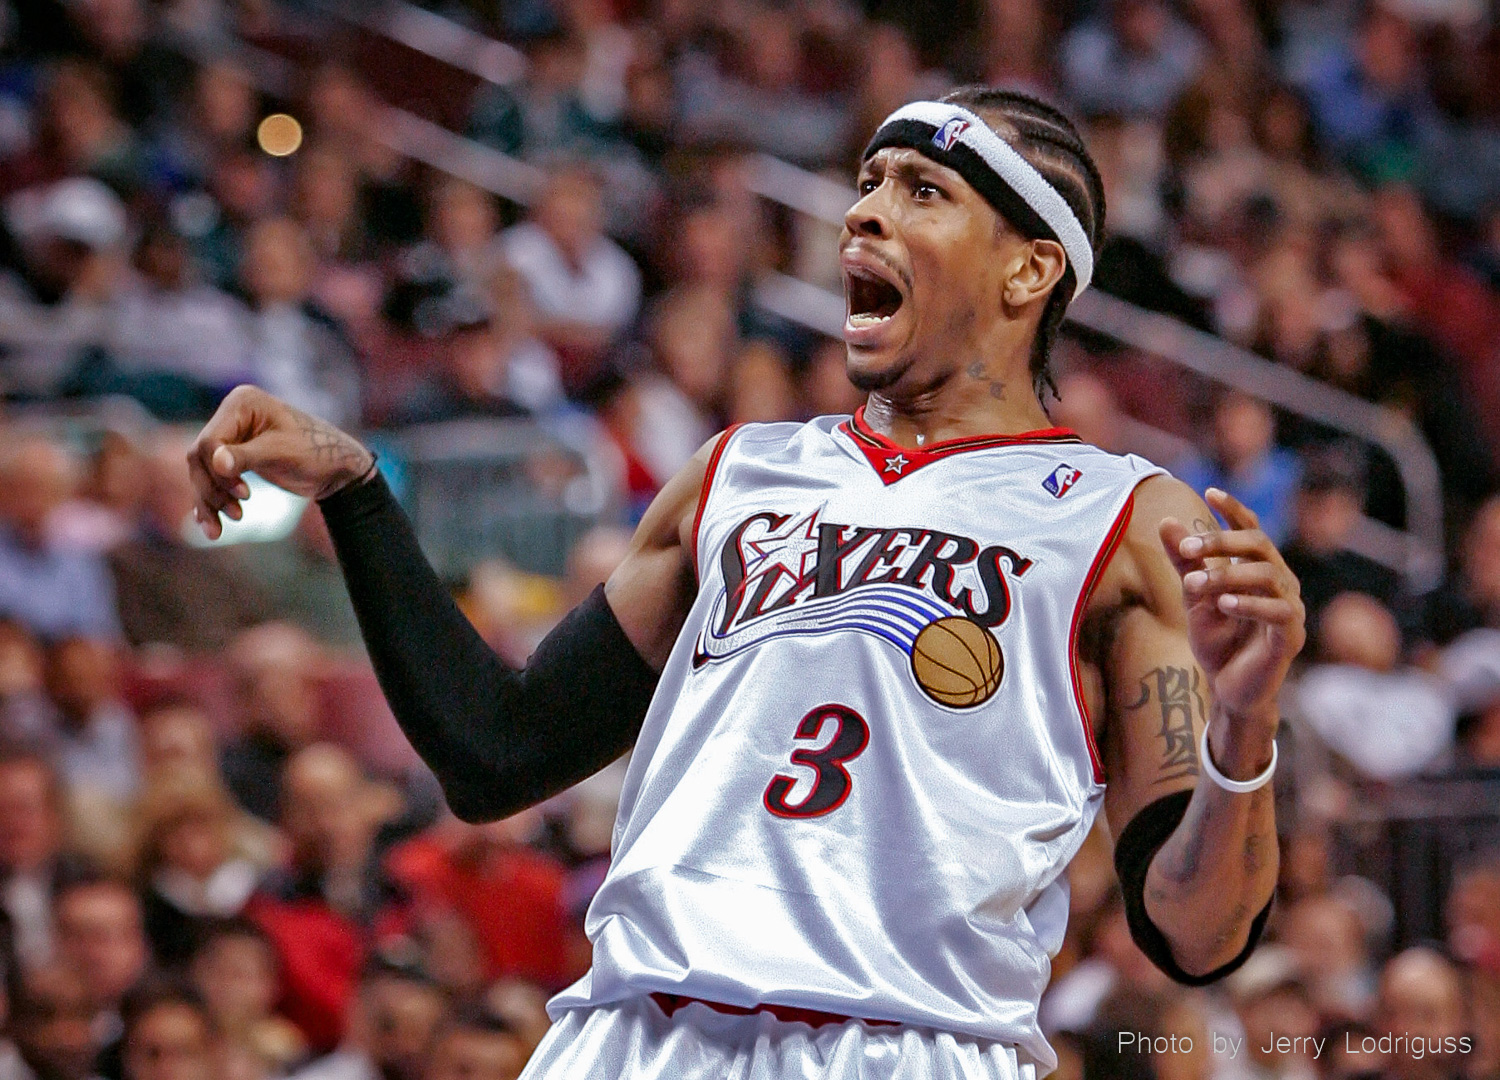 Sixers Allen Iverson reacts as he misses a free throw after a made basket that would have given him a three-point play. Iverson finished the first half with 24. The Philadelphia 76ers faced the Toronto Raptors on January 14, 2005.